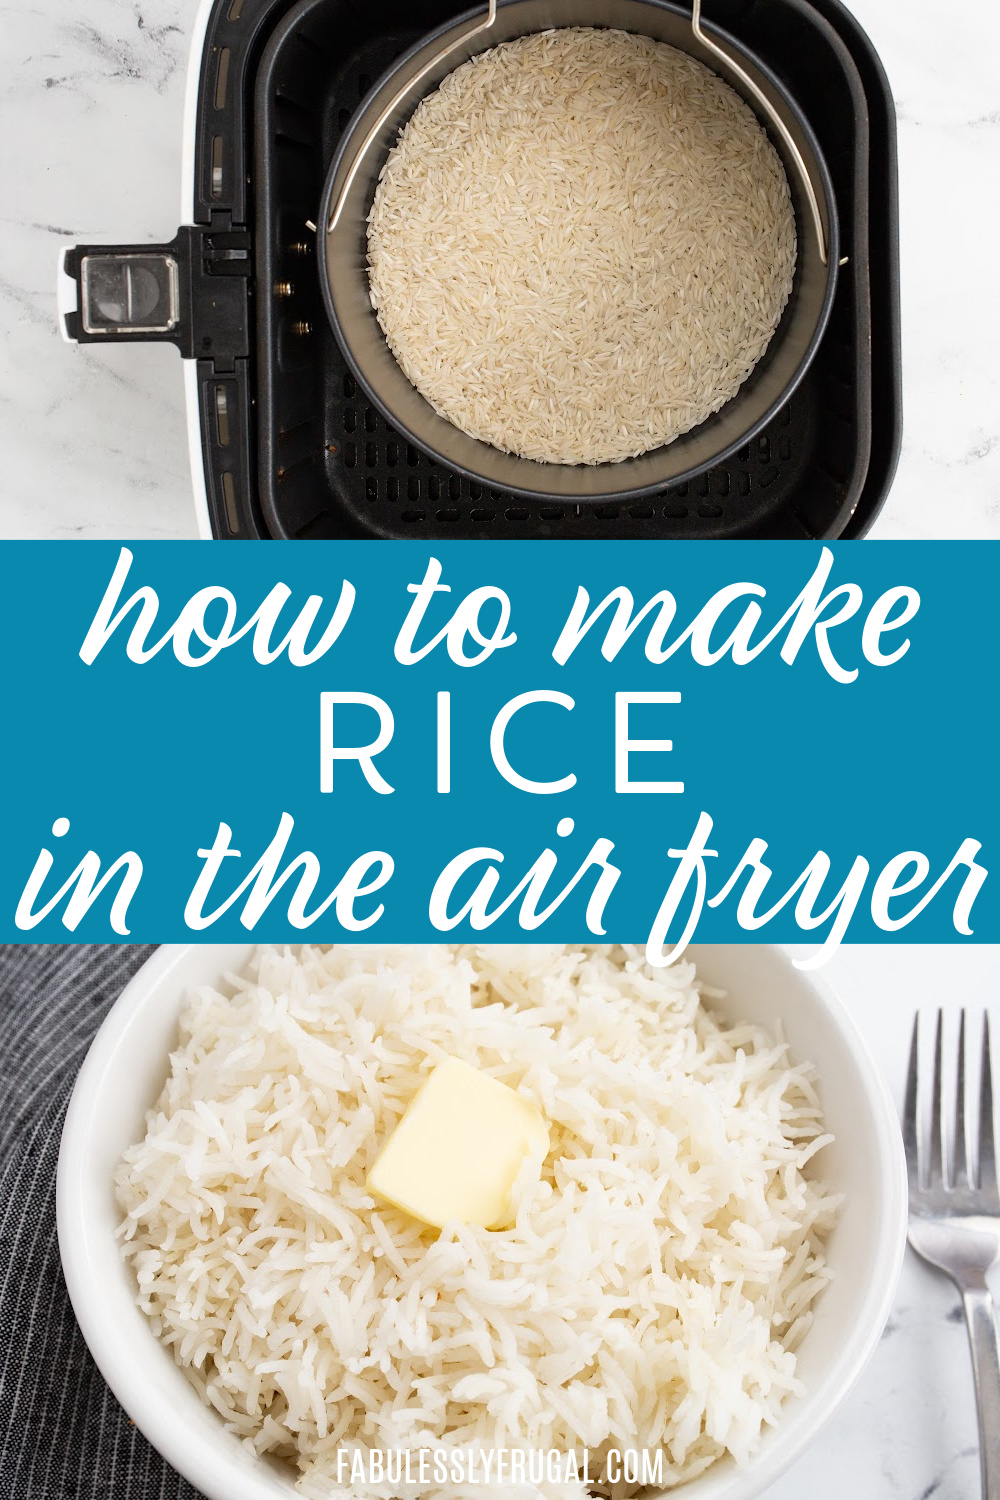 https://fabulesslyfrugal.com/wp-content/uploads/2022/11/how-to-make-rice-in-the-air-fryer-2.jpg